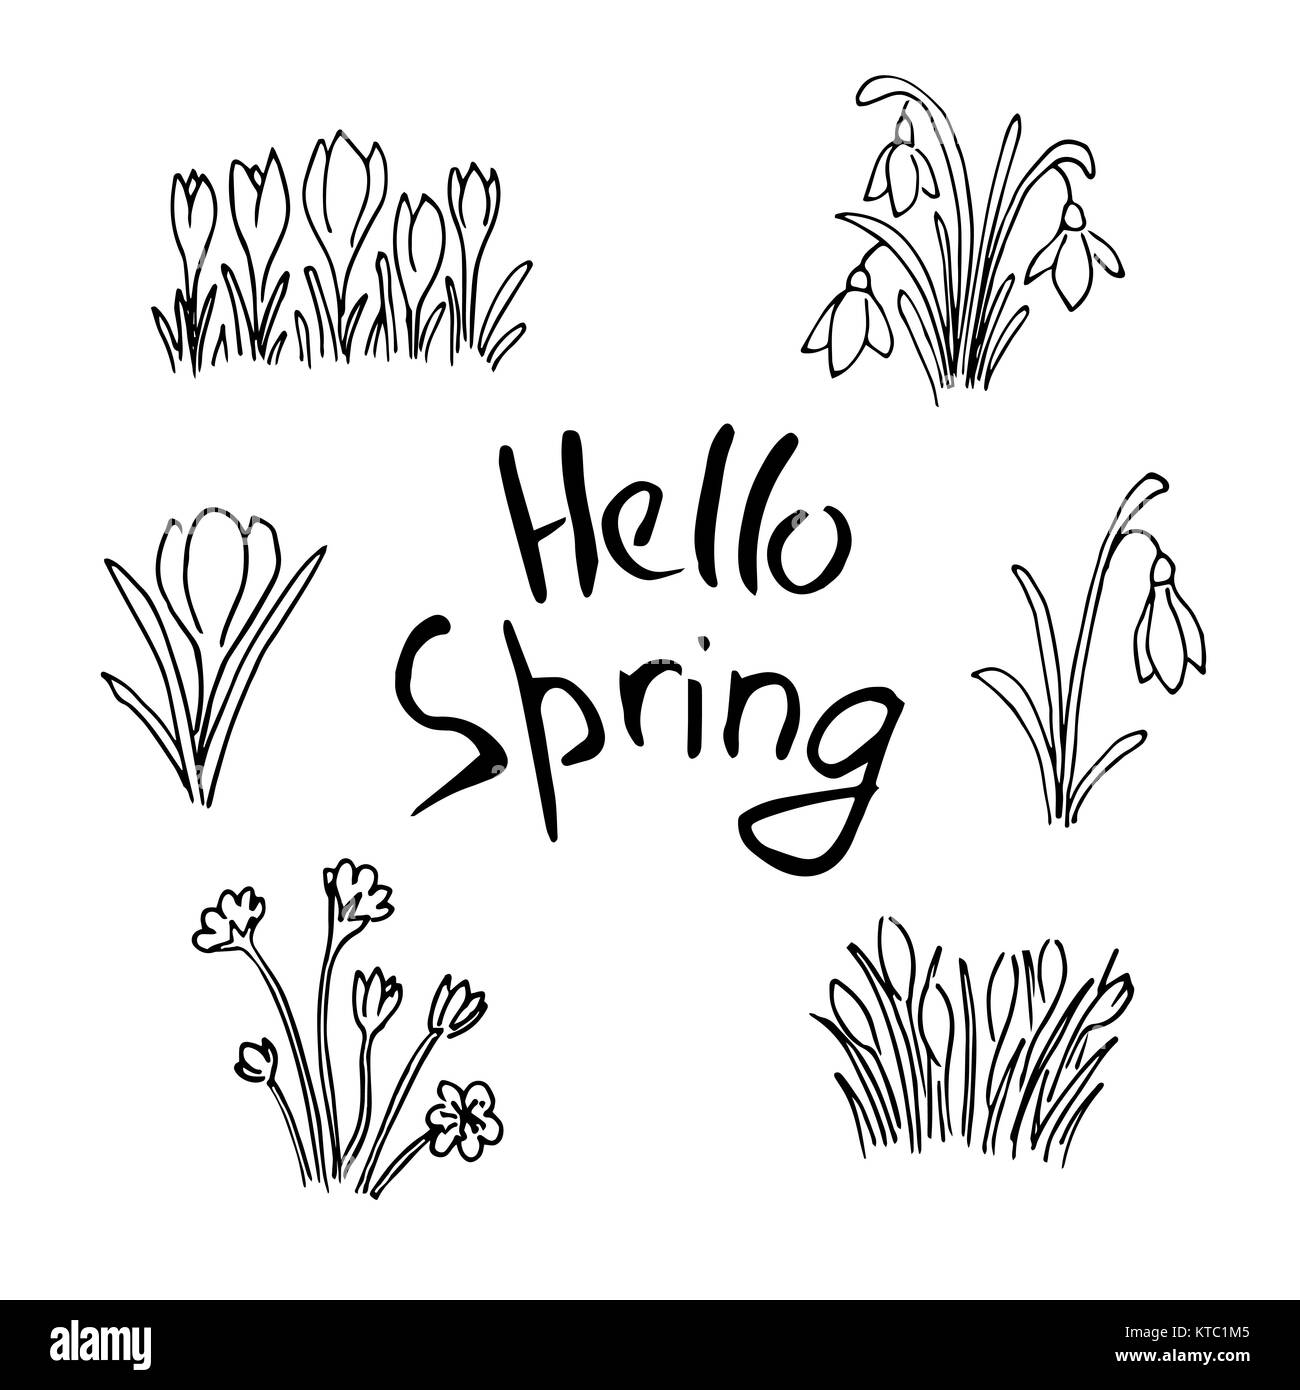 Spring Aesthetic Drawing Little Set Stock Vector (Royalty Free) 1666909327  | Shutterstock